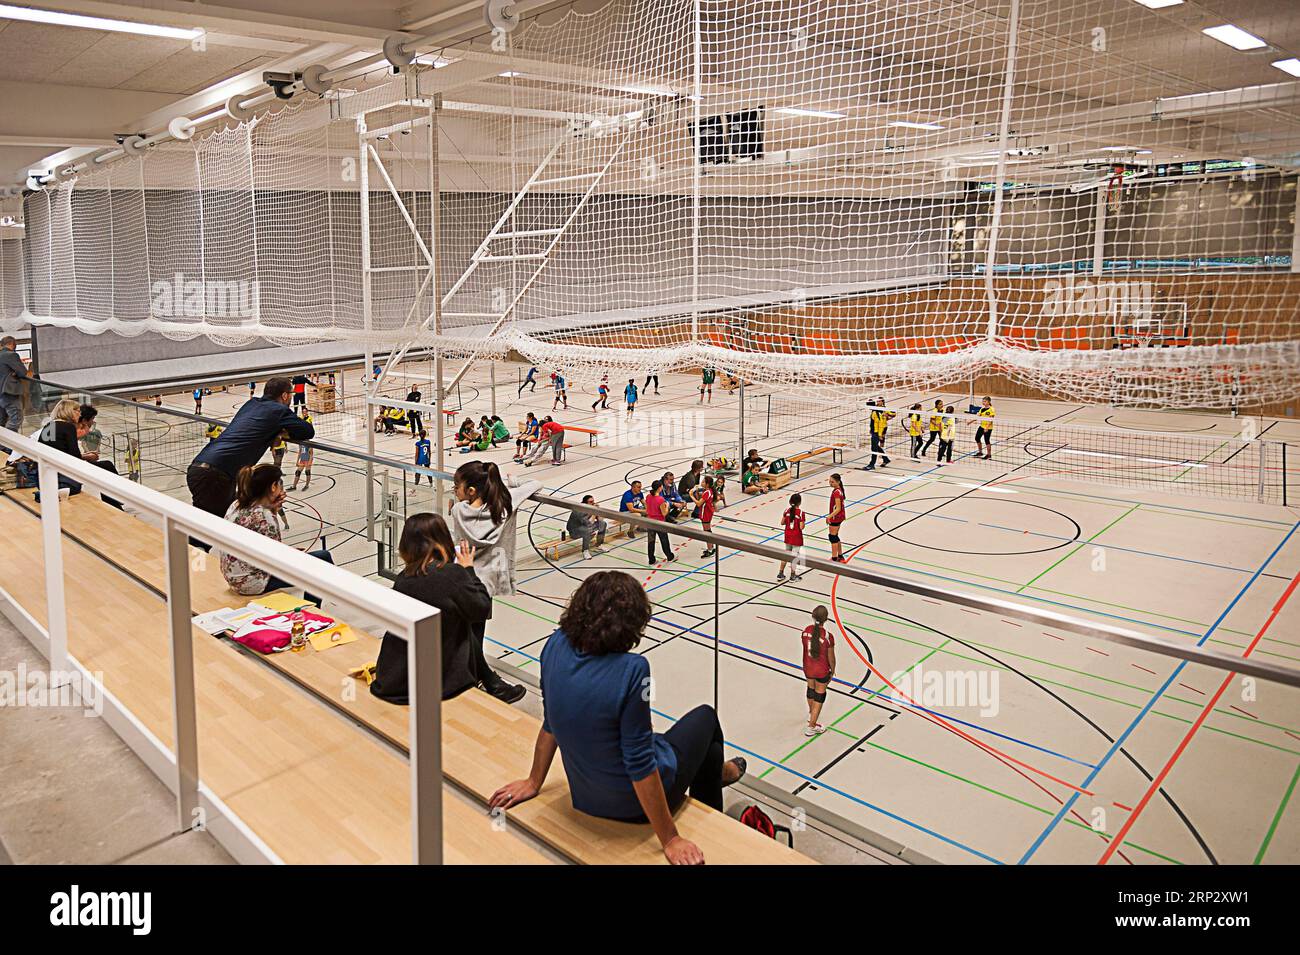 Gym, sports hall, spectators and active people, education, physical education, teaching mission, children's health, modern spacious building, primary Stock Photo